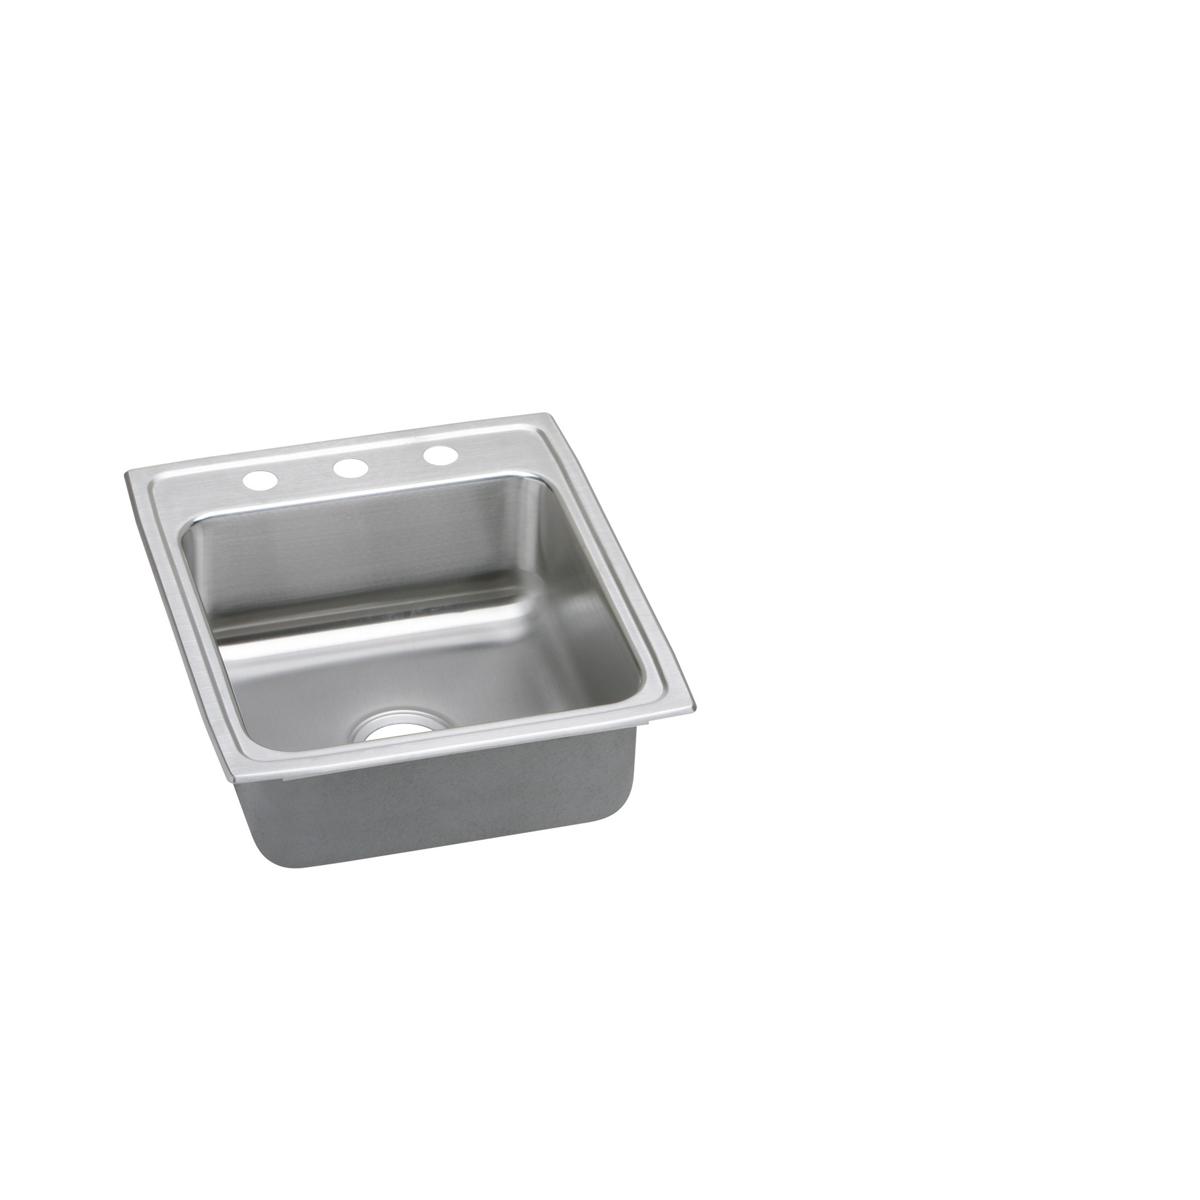 Elkay Lustertone Classic 19-1/2" x 22" x 6-1/2" MR2-Hole Single Bowl Drop-in ADA Sink with Quick-clip